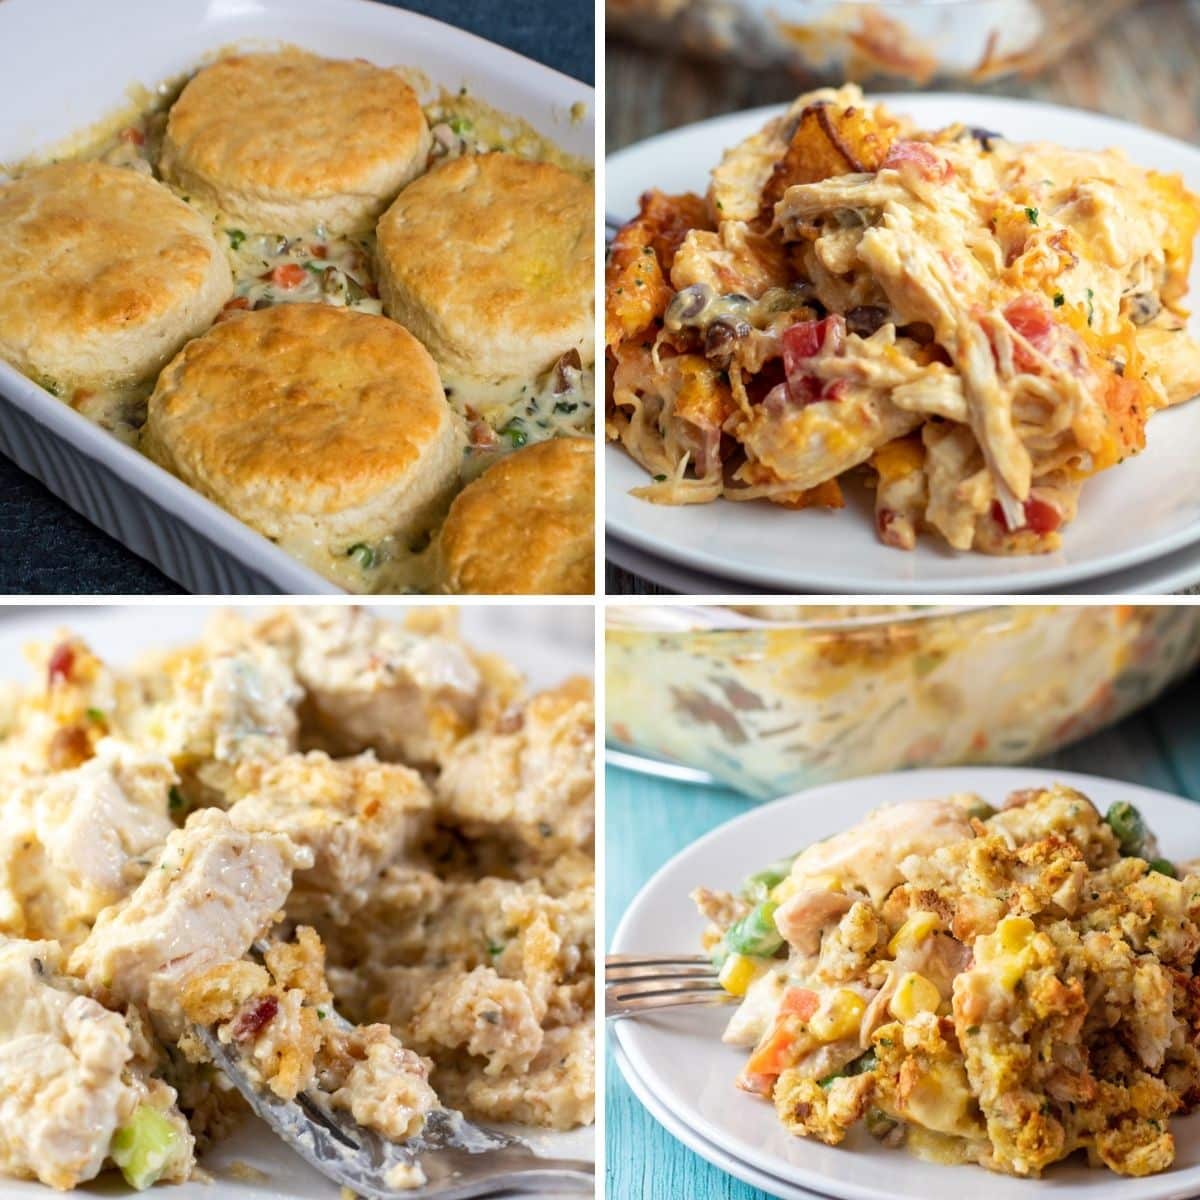 Best chicken casseroles to make for a great dinner like these family favorite dishes featuring biscuit chicken pot pie, doritos chicken casserole, and more!